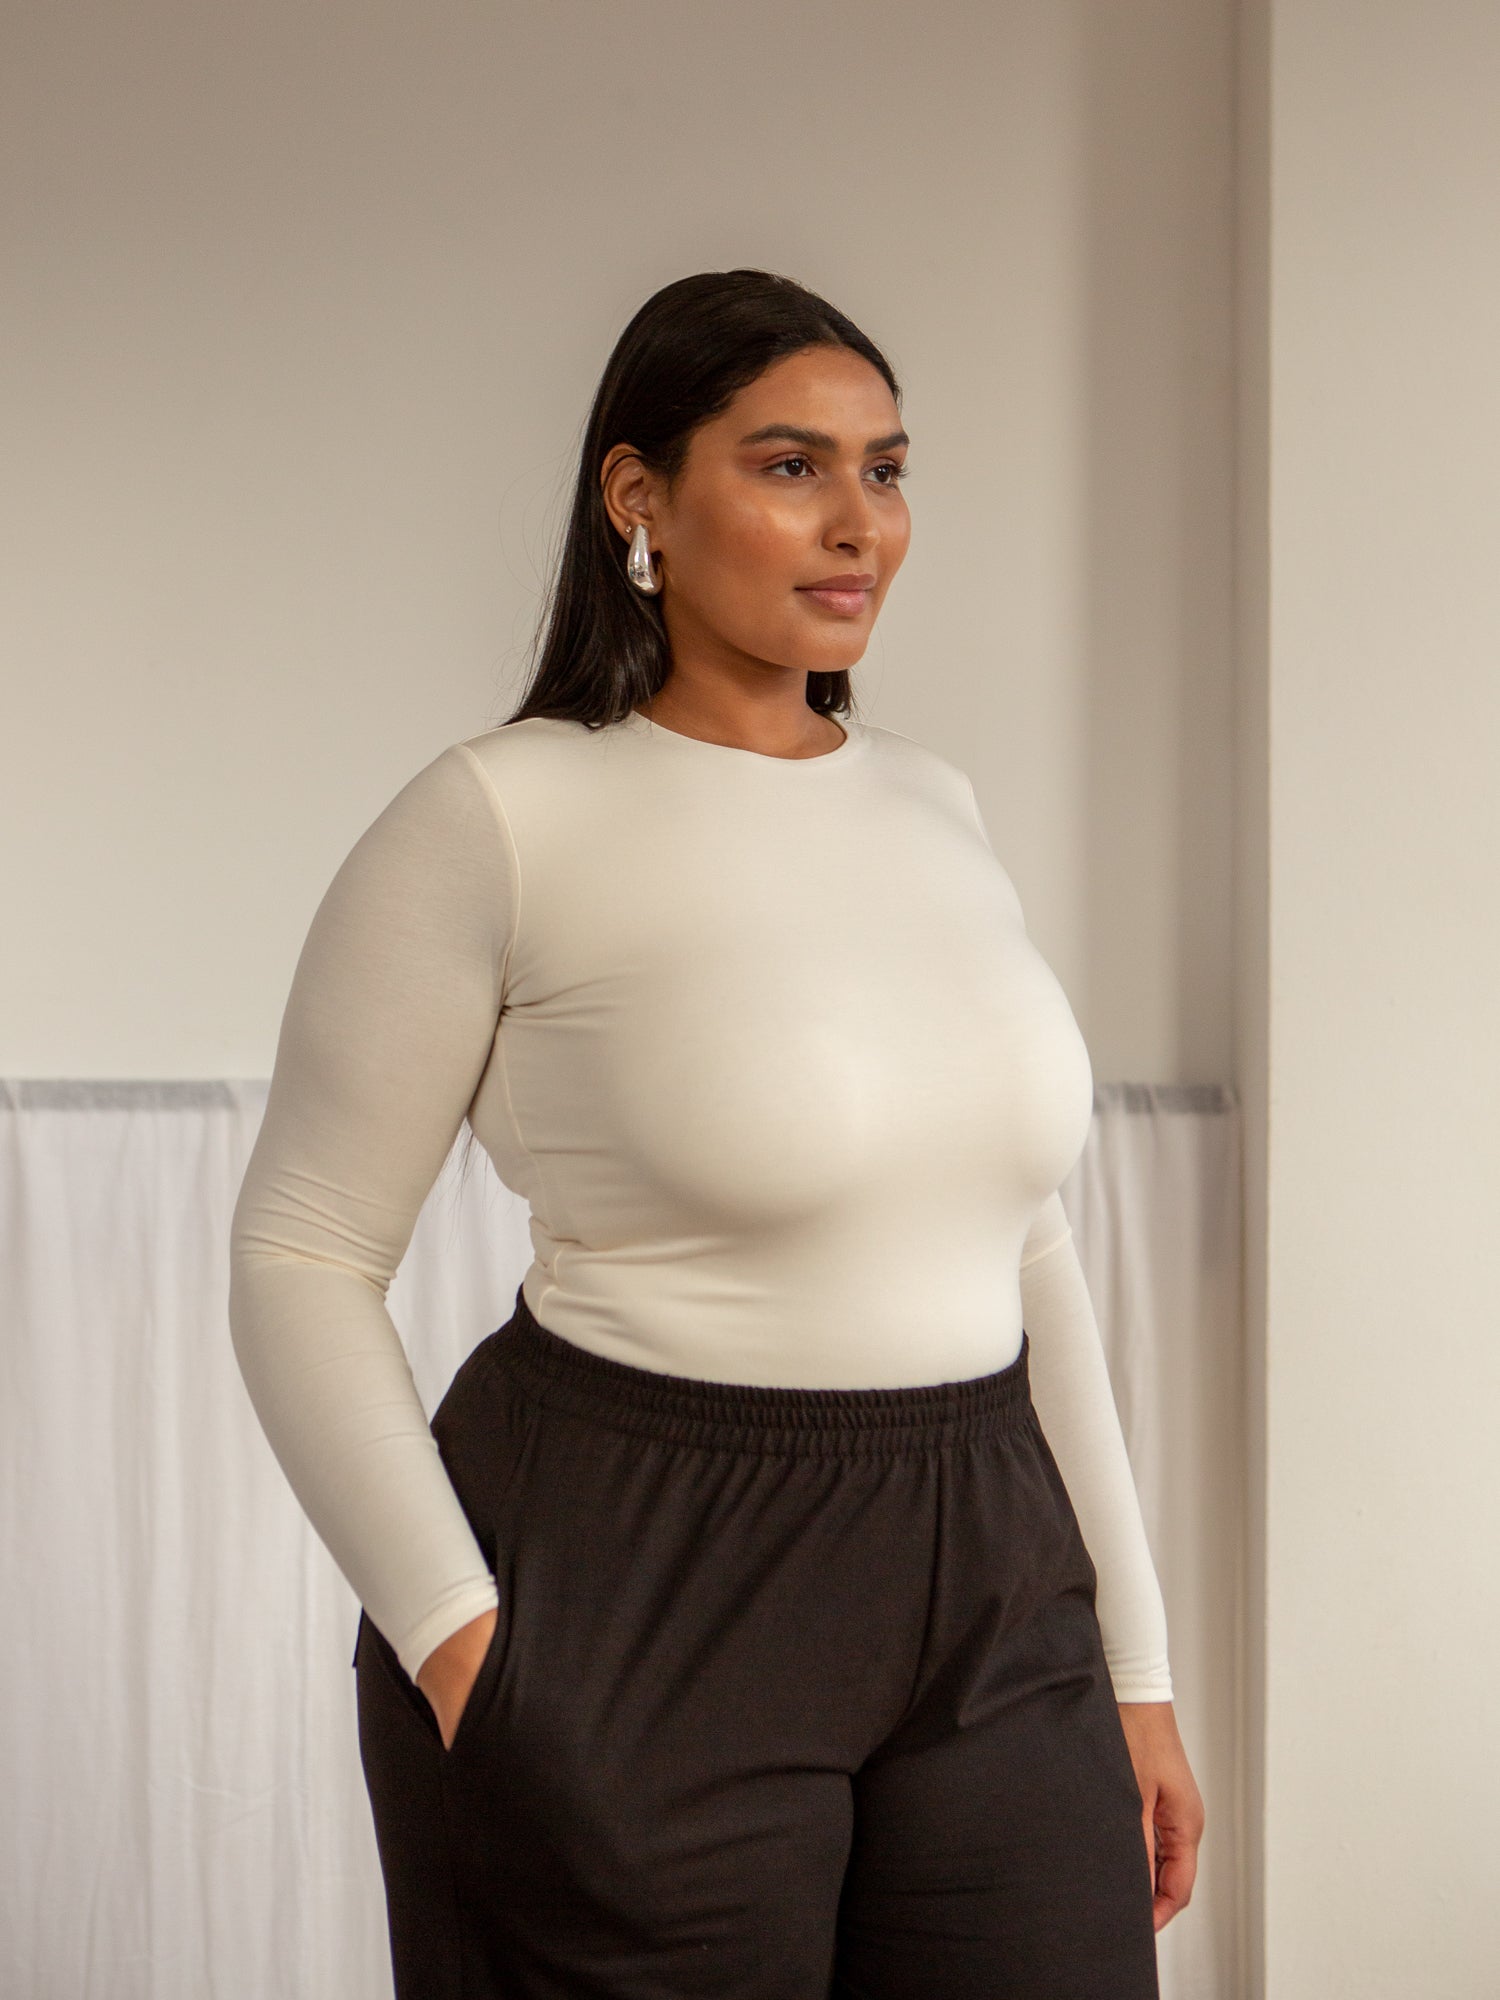 SHEIN USA  White crop top outfit, Long sleeve shirt outfits